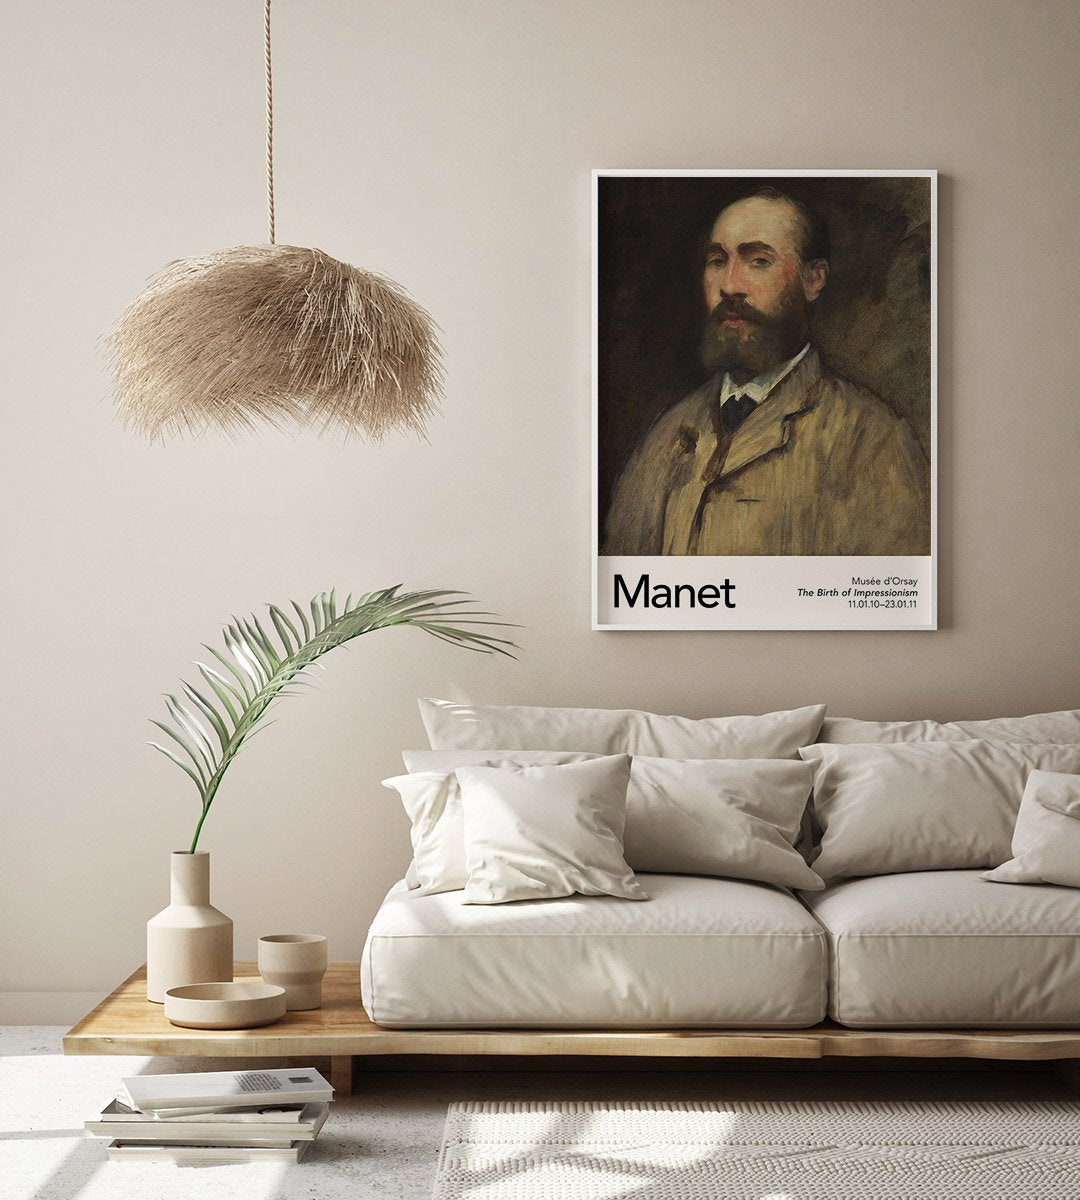 Jean Baptiste Faure Nr 2 by Manet Exhibition Poster